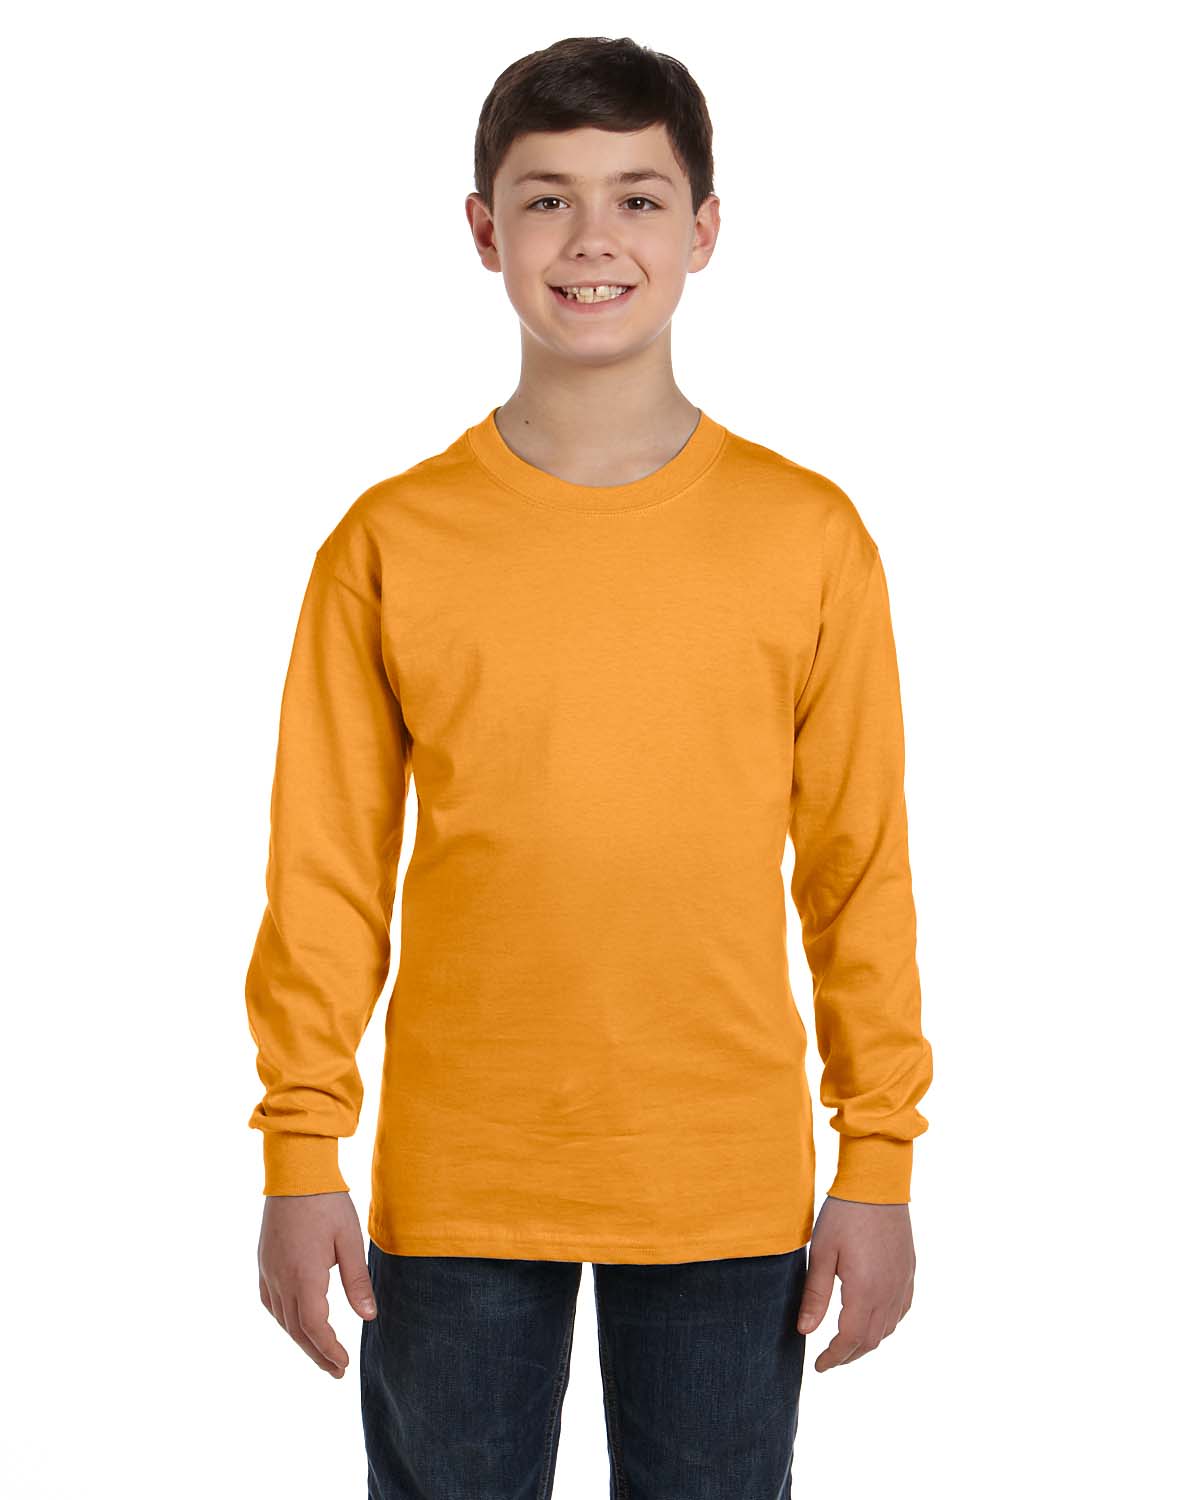 Hanes Youth Authentic-t Long-sleeve T-shirt